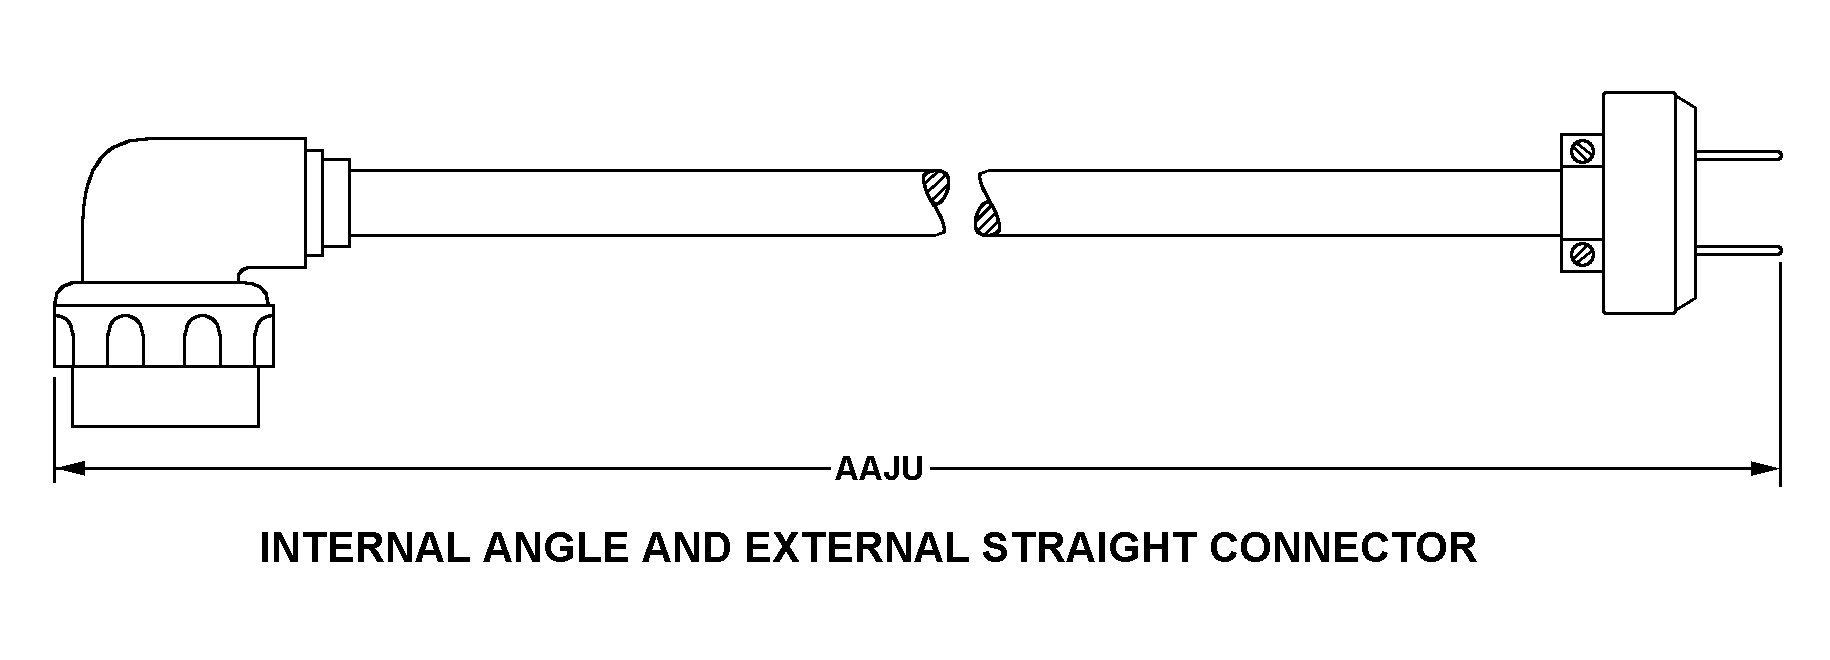 INTERNAL ANGLE AND EXTERNAL STRAIGHT CONNECTOR style nsn 6150-01-372-6824